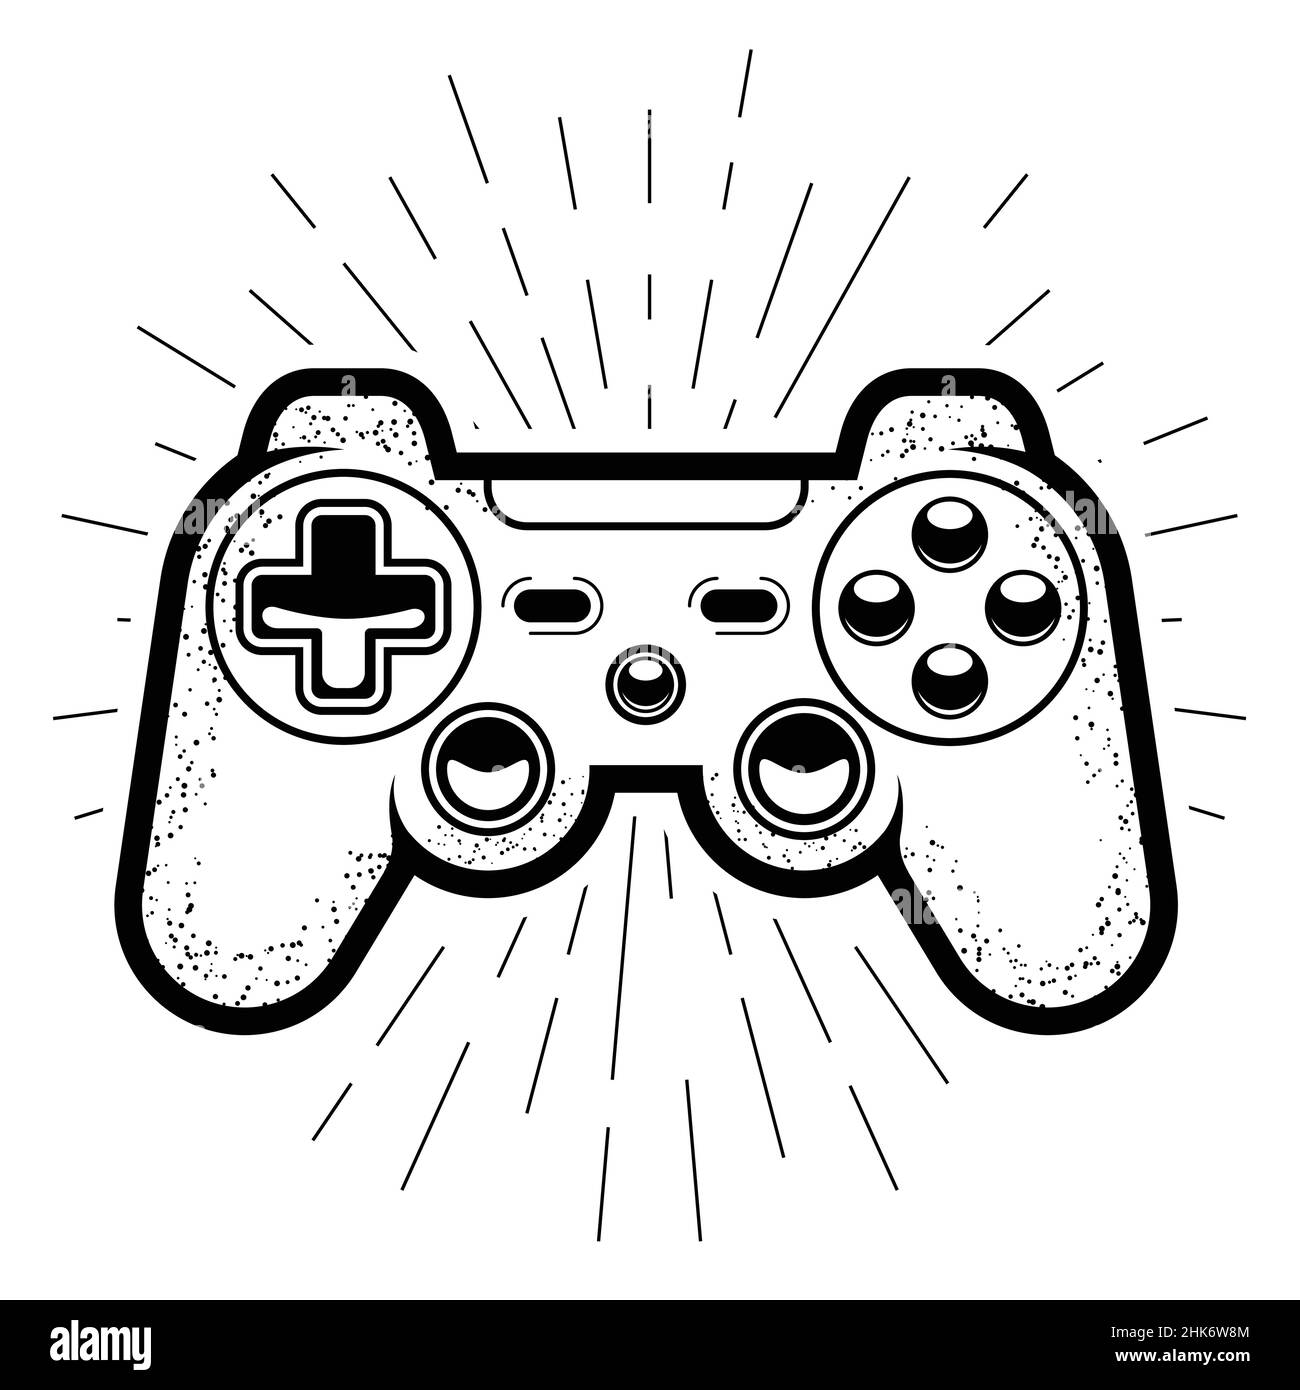 Two-hand game controller, console joystick or gamepad icon, vector Stock Vector